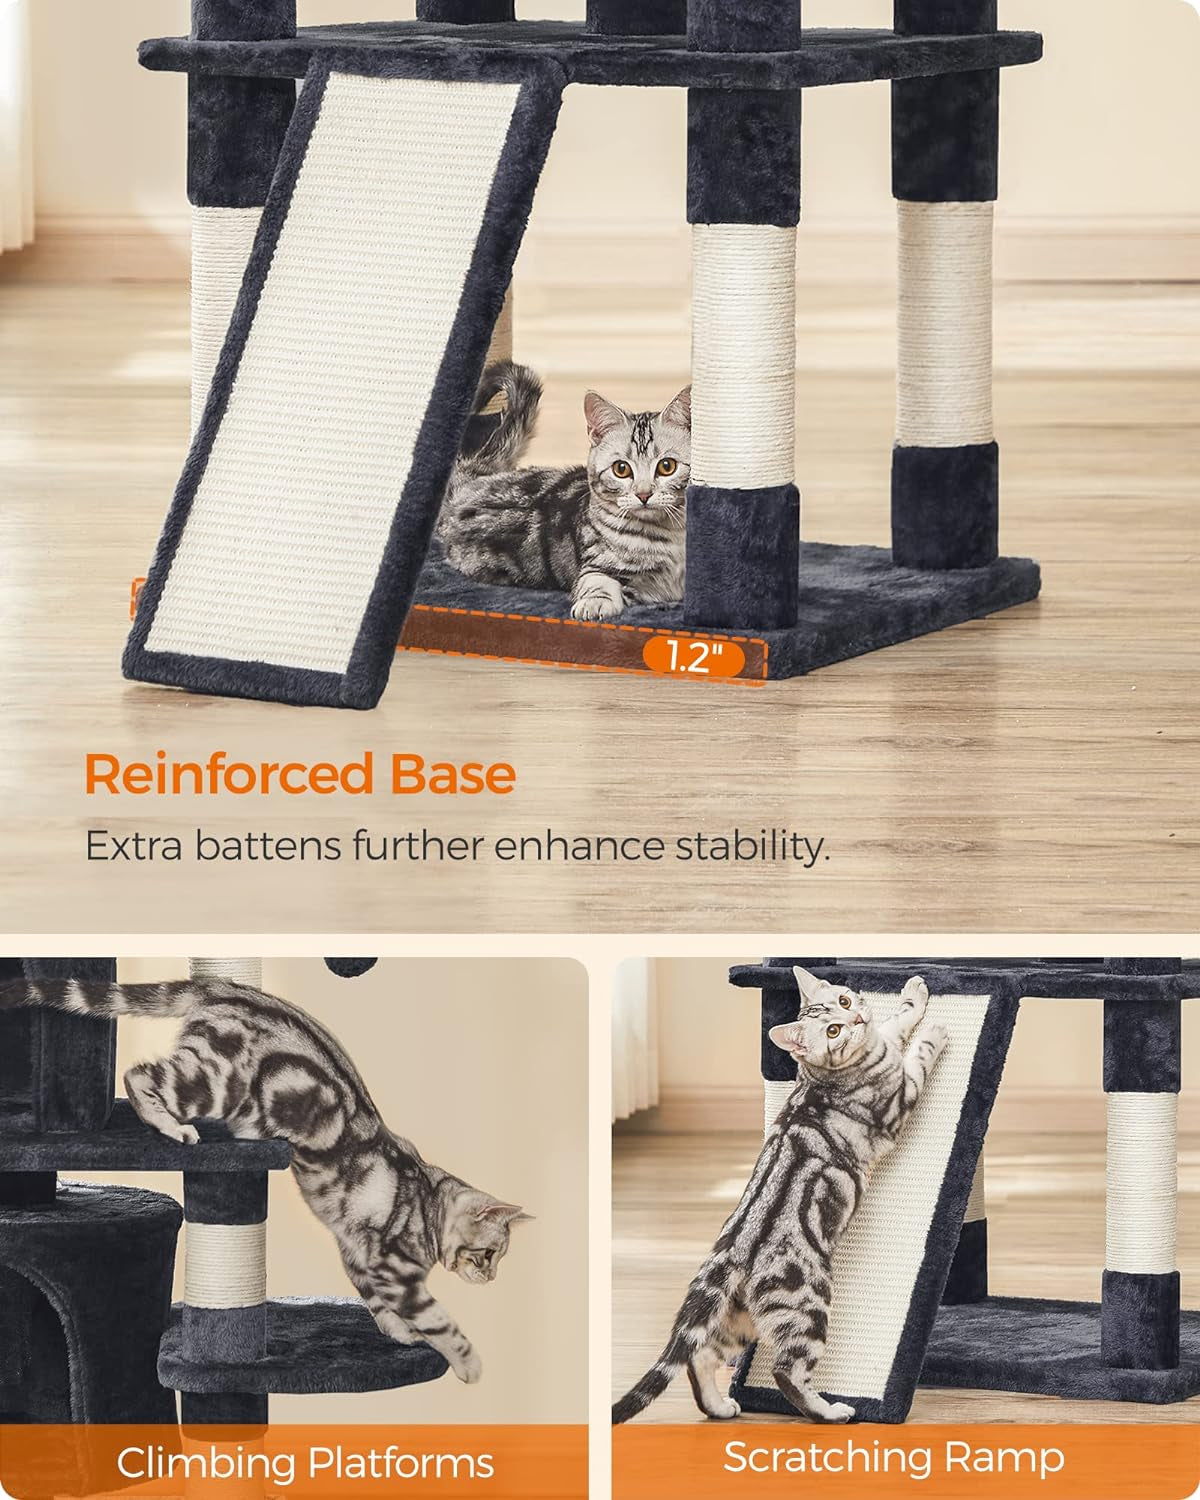 67-Inch Multi-Level Cat Tree for Large Cats, with Cozy Perches, Stable, Smoky Gray UPCT18G